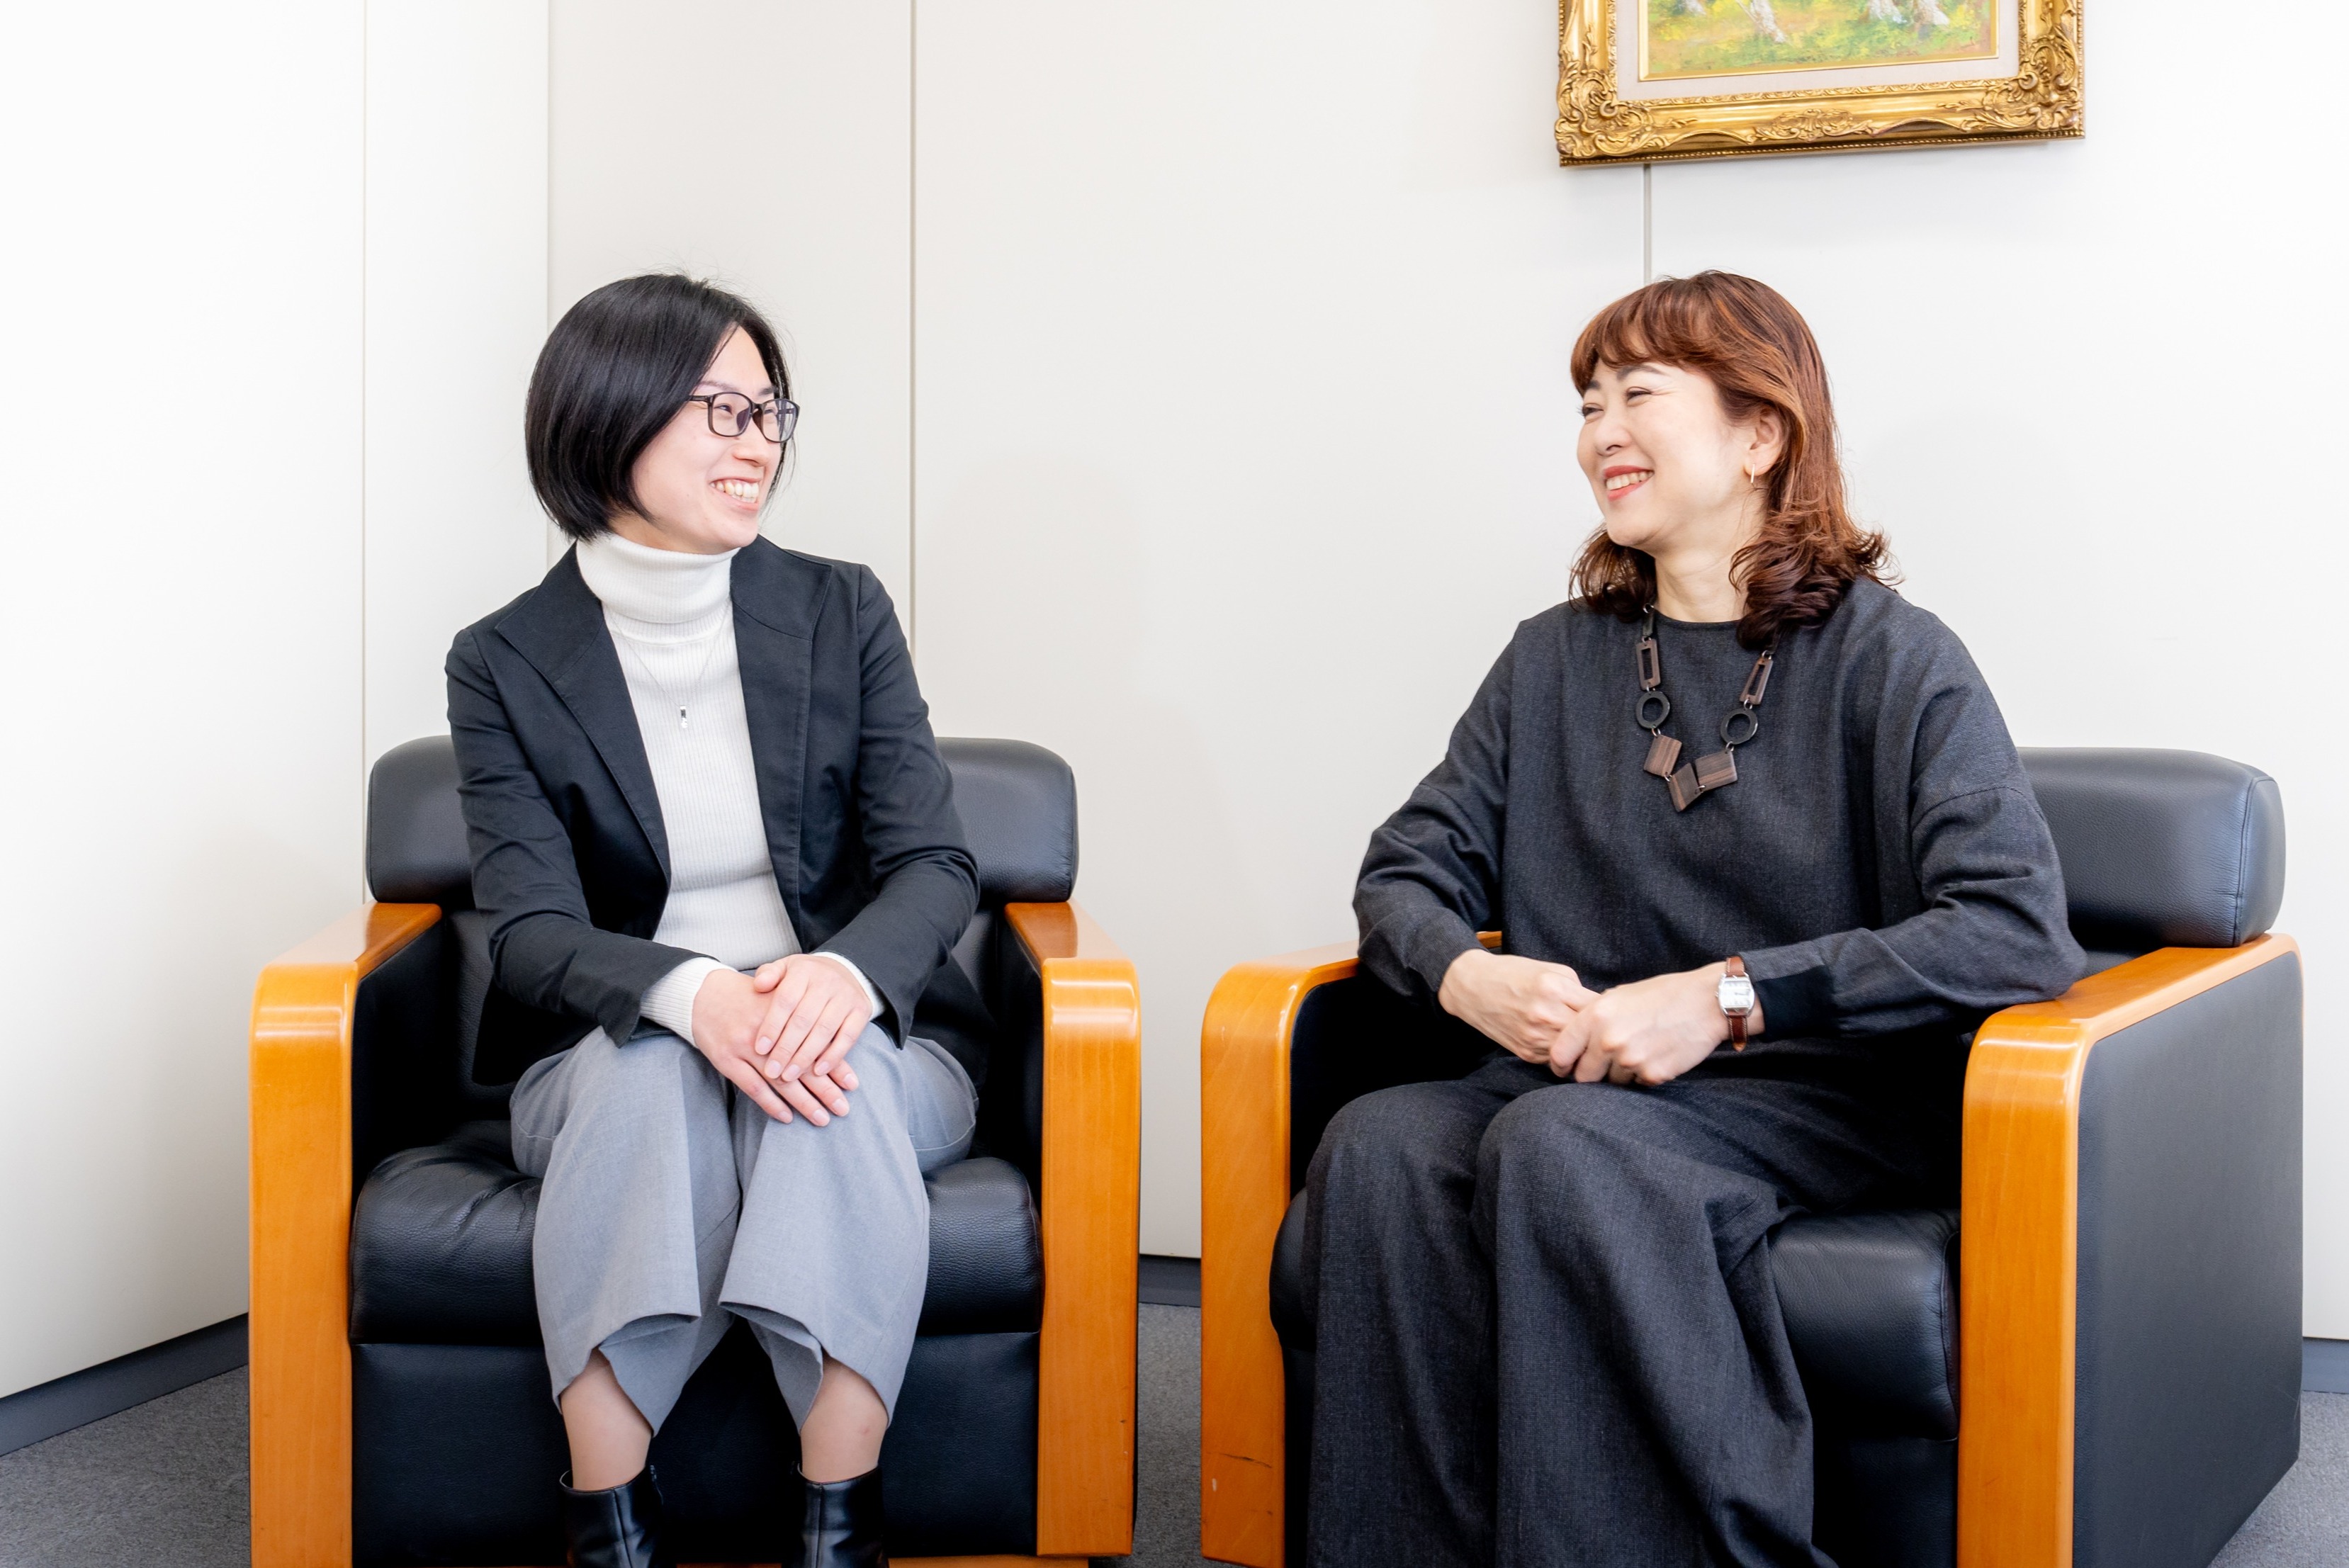 Shinohara (left) and Arima (right) discuss respect for human rights and Toshiba’s strengths